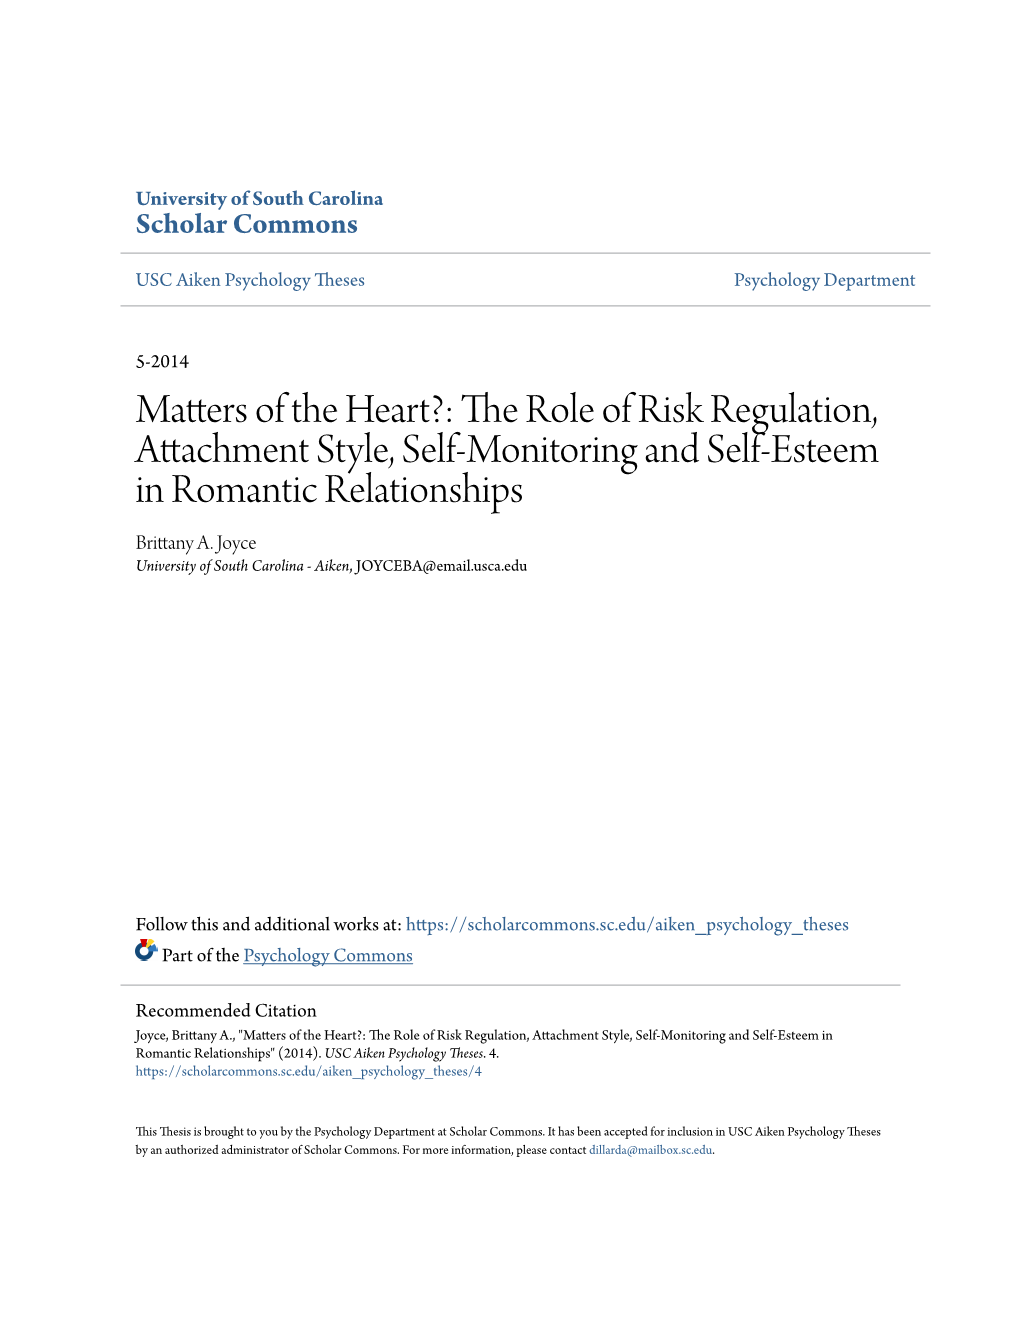 Matters of the Heart?: the Role of Risk Regulation, Attachment Style, Self-Monitoring and Self-Esteem in Romantic Relationships Brittany A